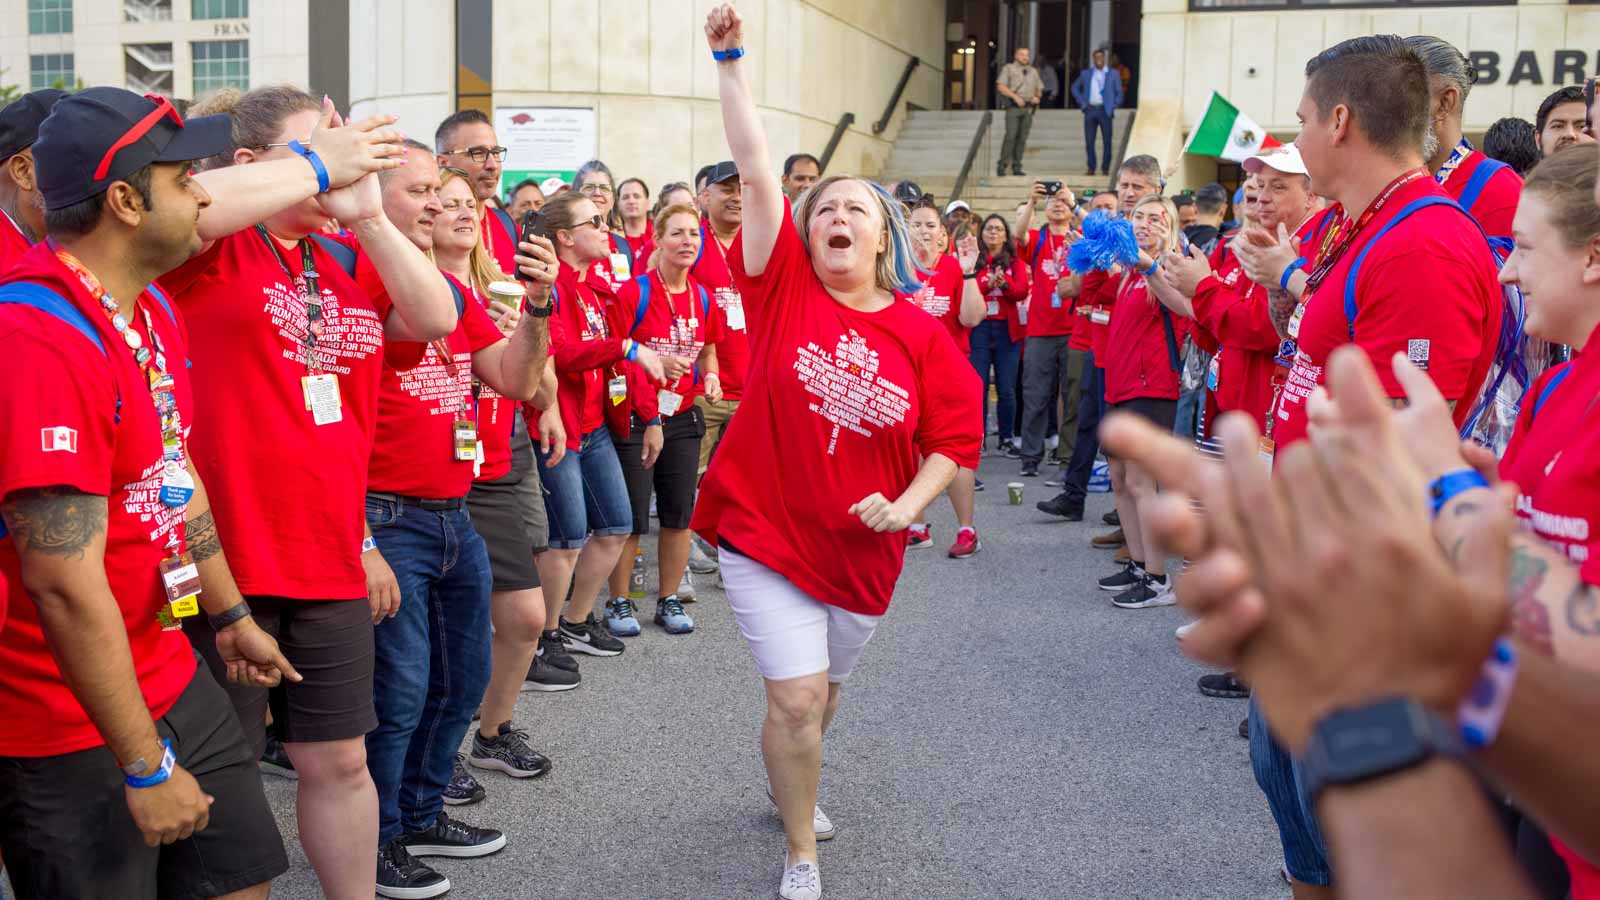 Canadian associates cheer while arriving to Associate's Week activities.